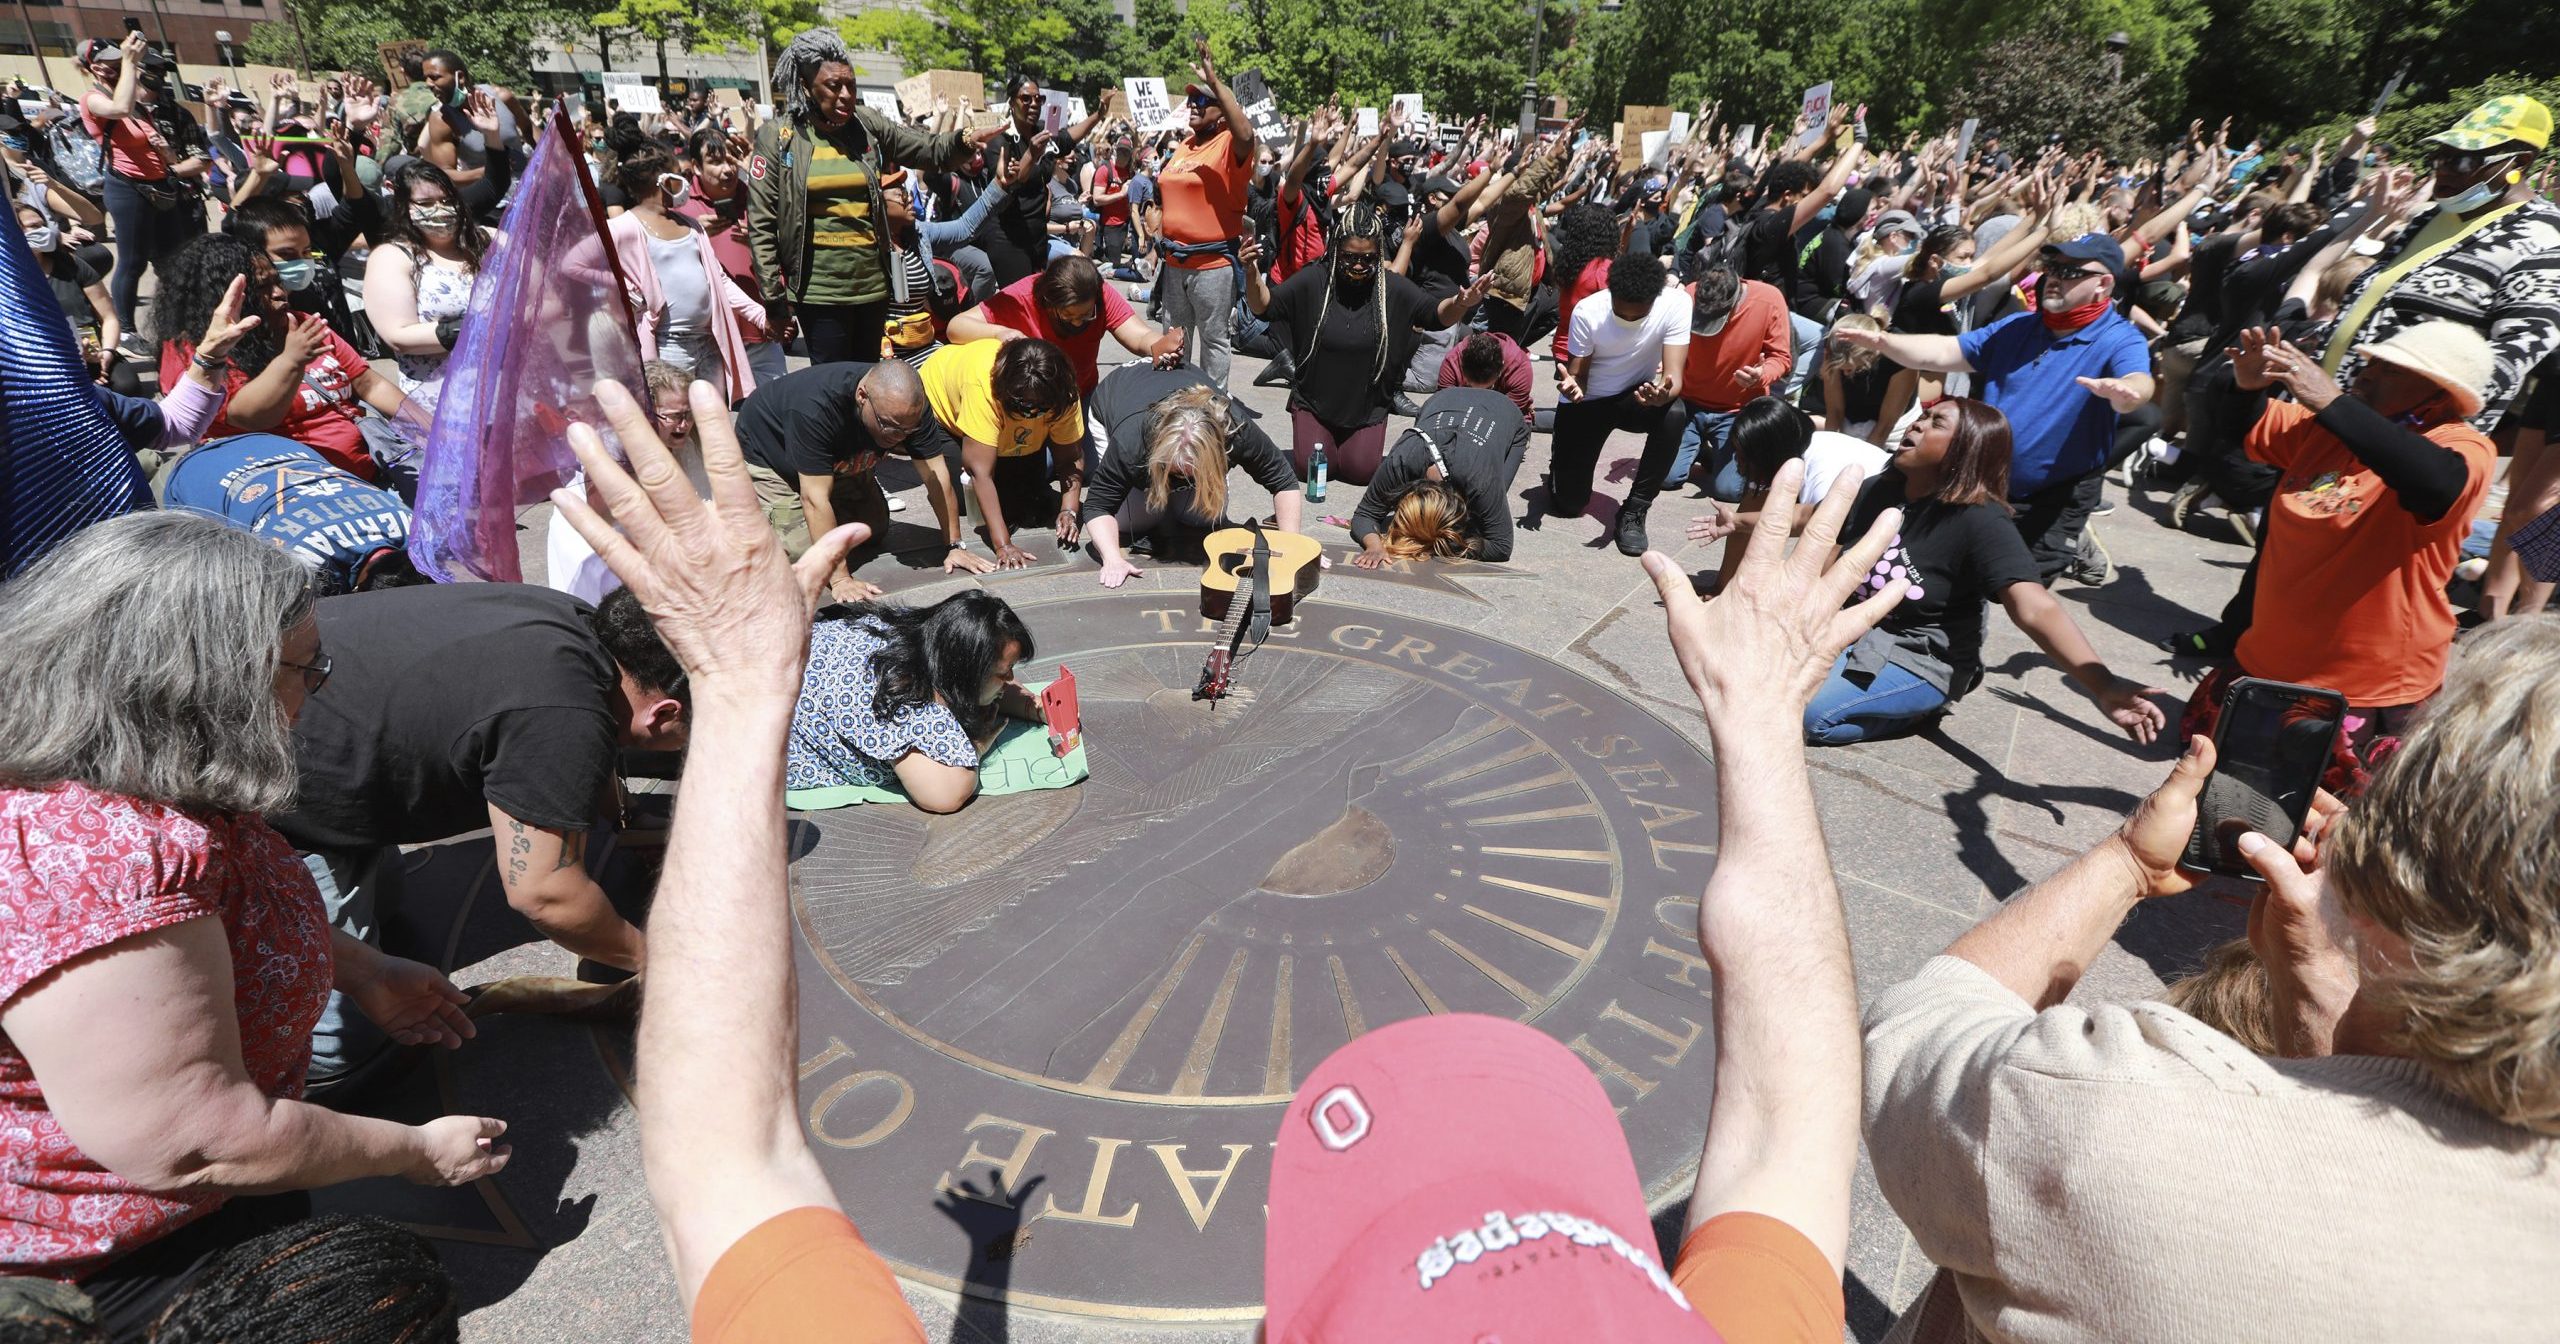 Members of the Shiloh Christian Center pray on the west lawn of the Ohio Statehouse on May 31, 2020, as crowds gather for a peaceful protest over the death of George Floyd, a black man who was killed in police custody in Minneapolis on May 25.